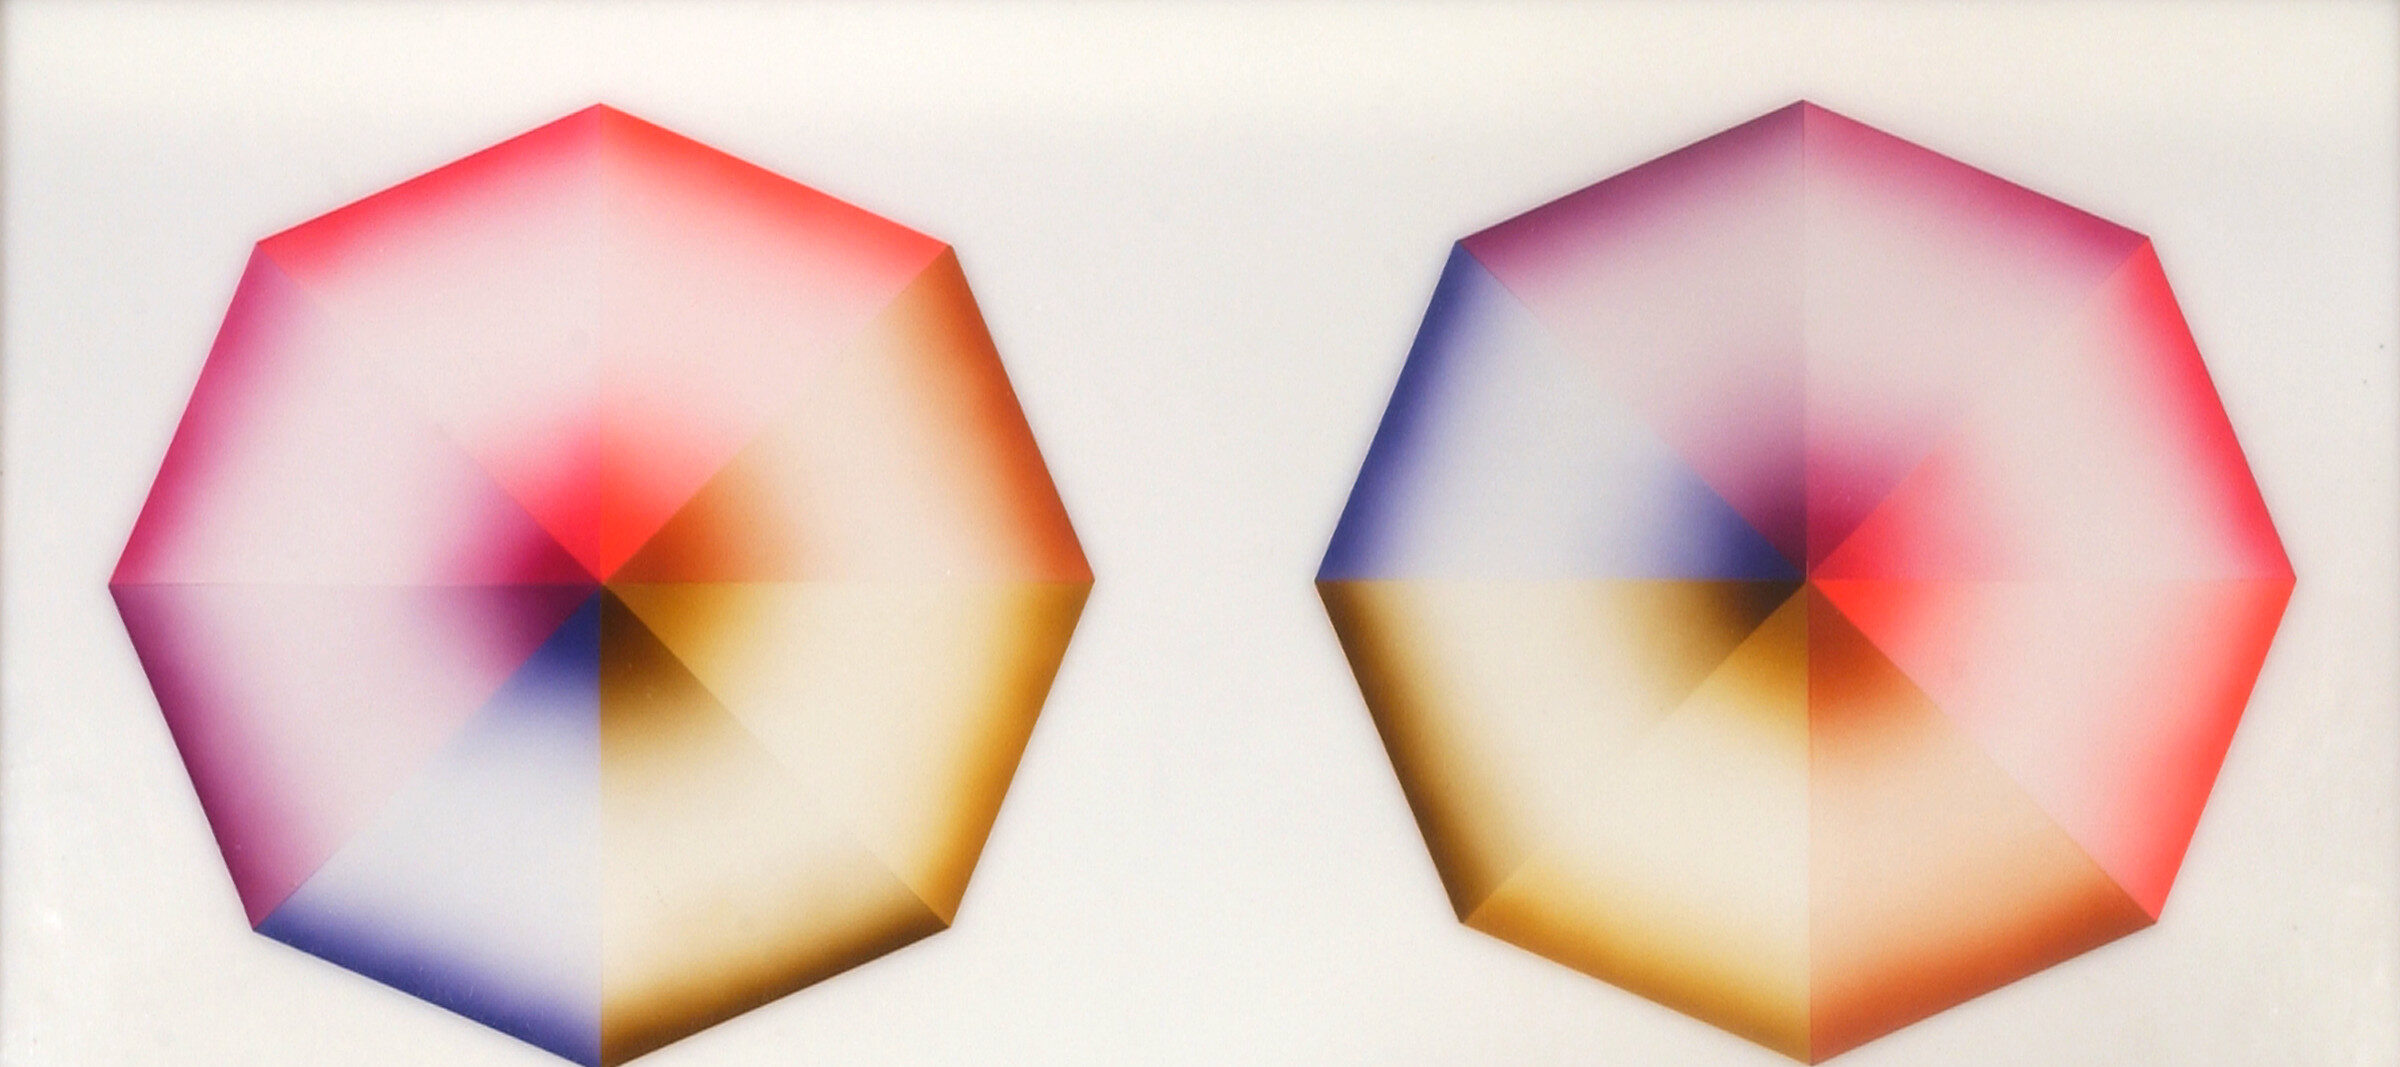 Two hard-edged octagons, each divided into eight pie-slice shapes painted red, pink, orange, yellow, olive green, blue, violet, or lavender, occupy a square, white background. Dark at the wide and narrow ends of each wedge, the hues create the illusion of 3-dimensional forms.